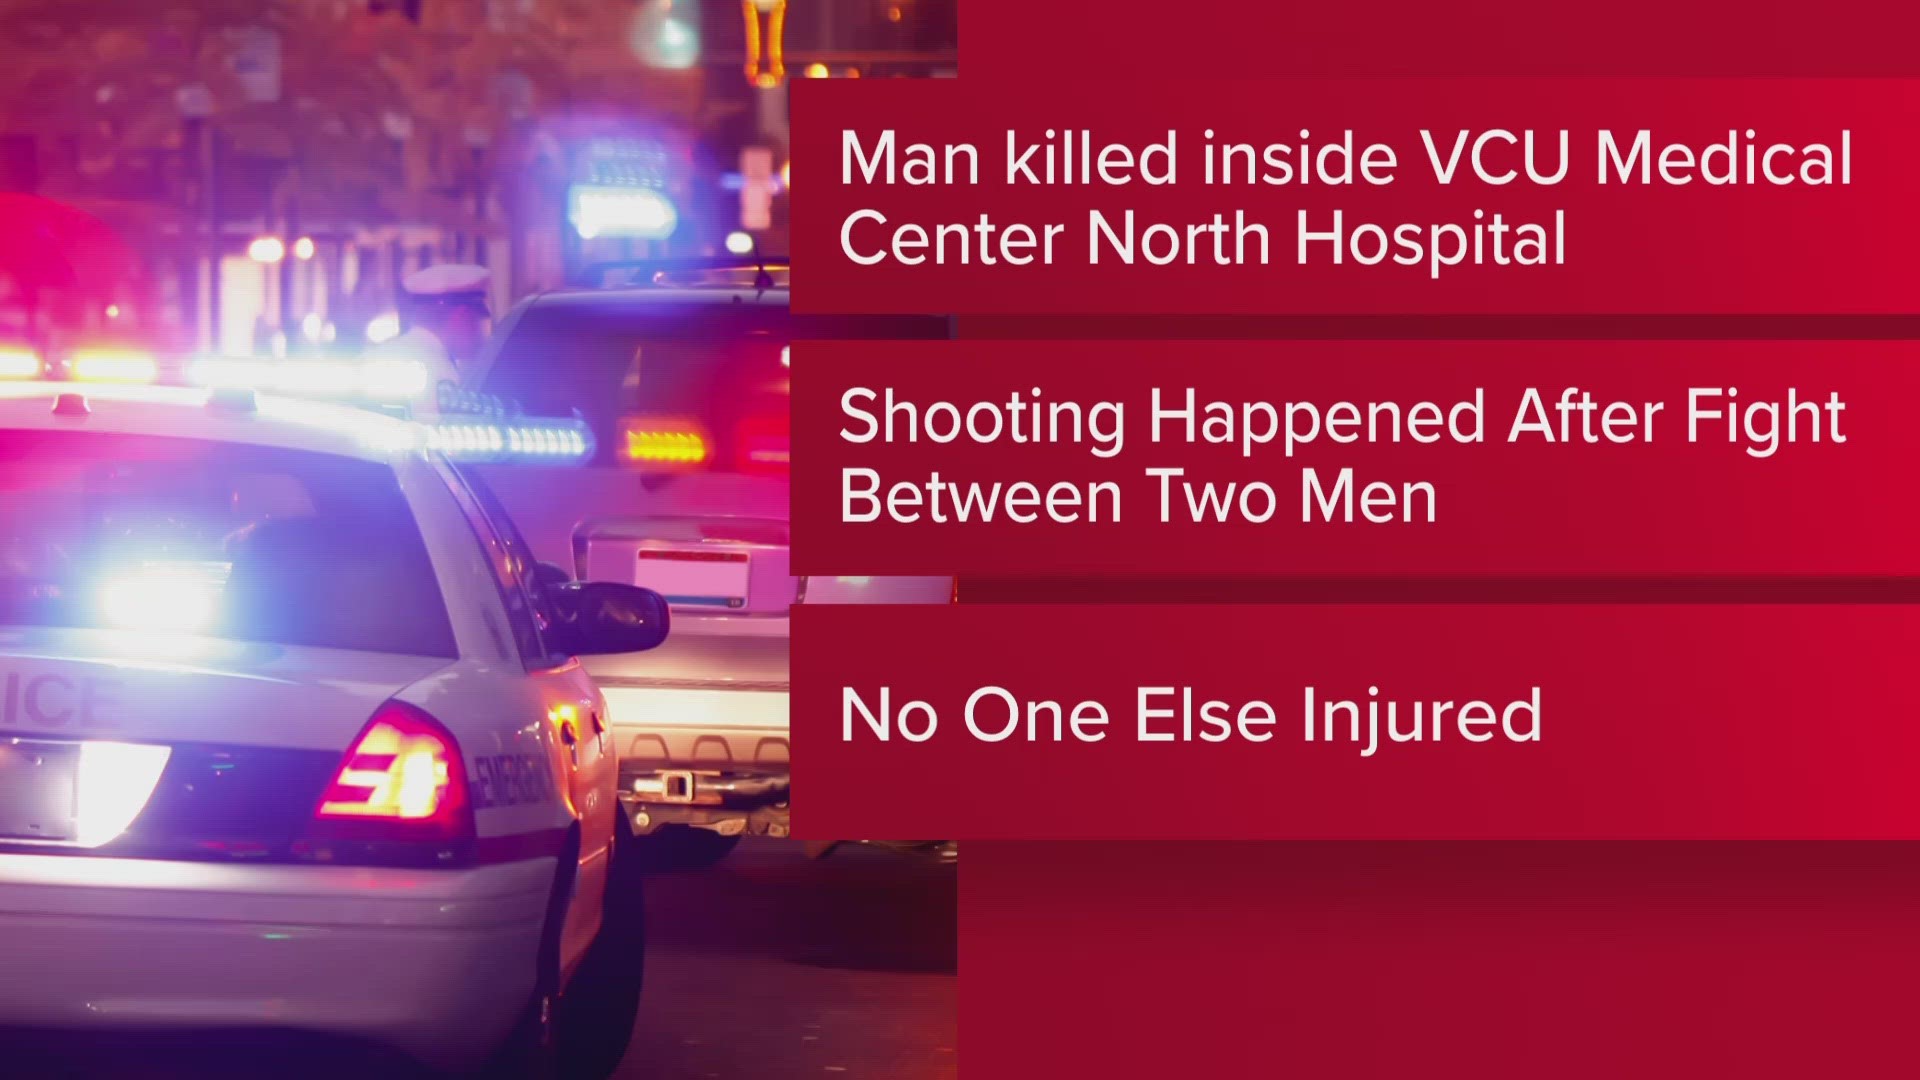 One man is dead after being shot inside Richmond, Virginia, hospital early Wednesday morning.